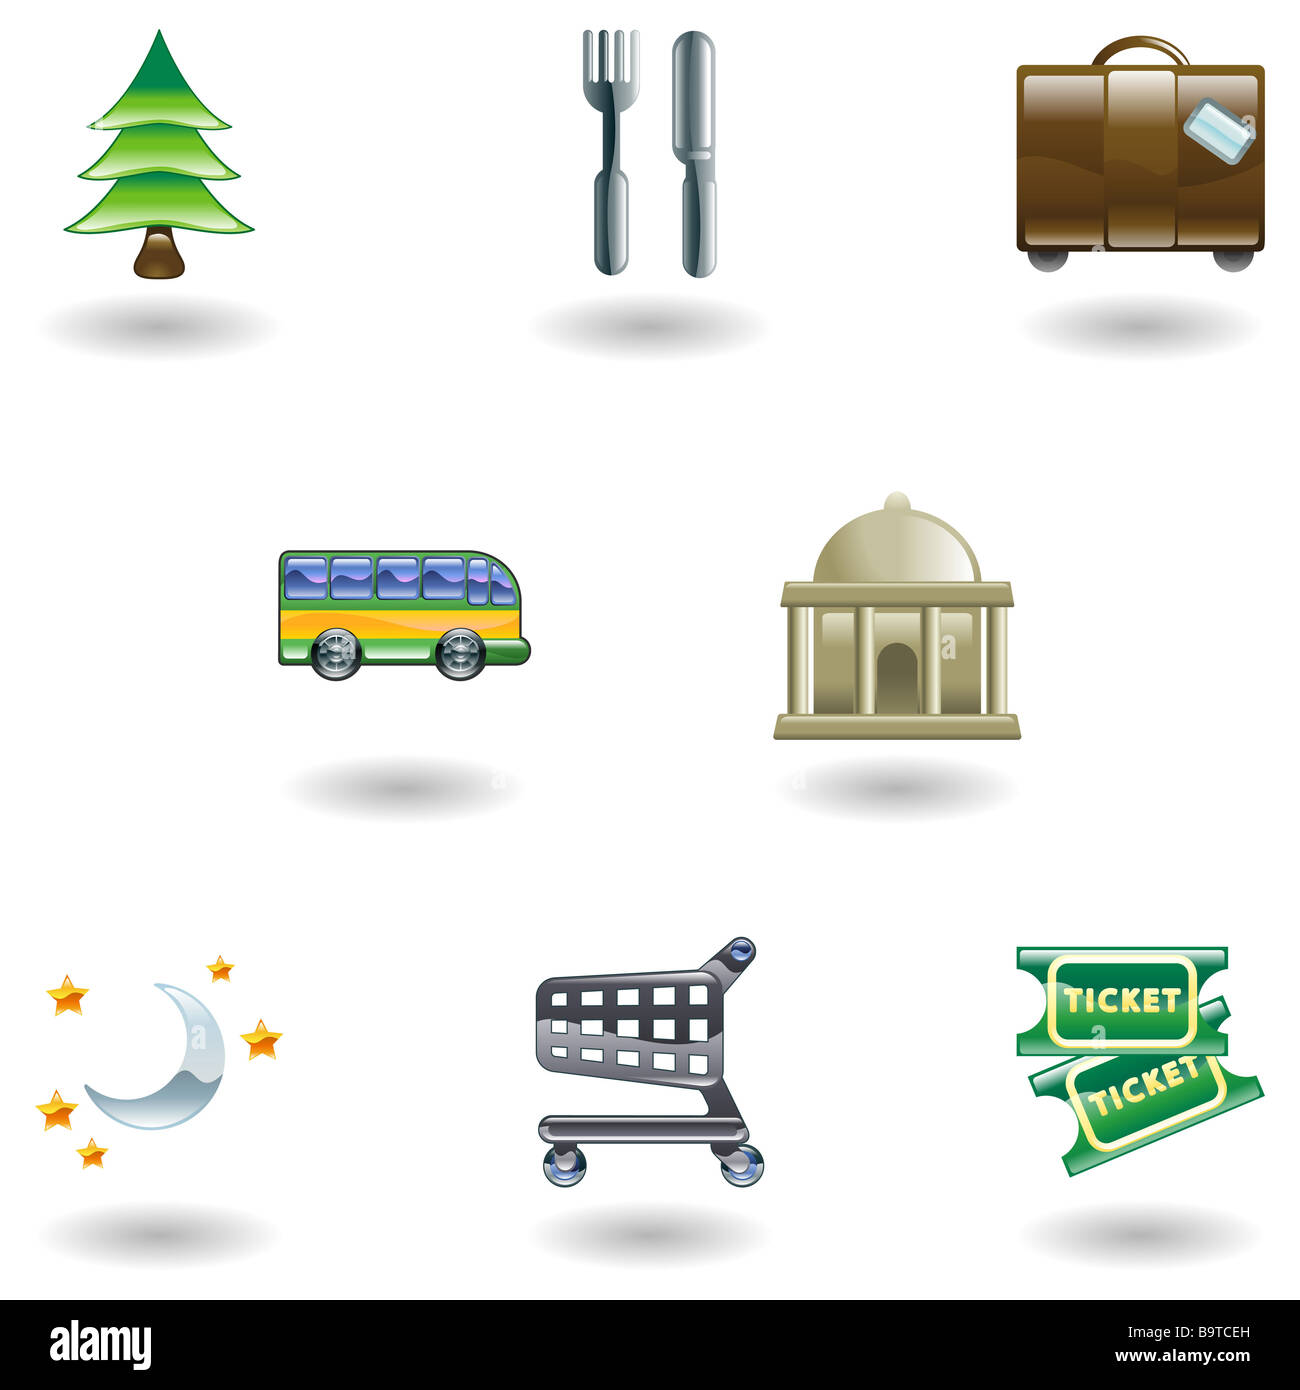 Tourist locations icon set Icon set relating to city or location information for tourist web sites or maps etc Stock Photo